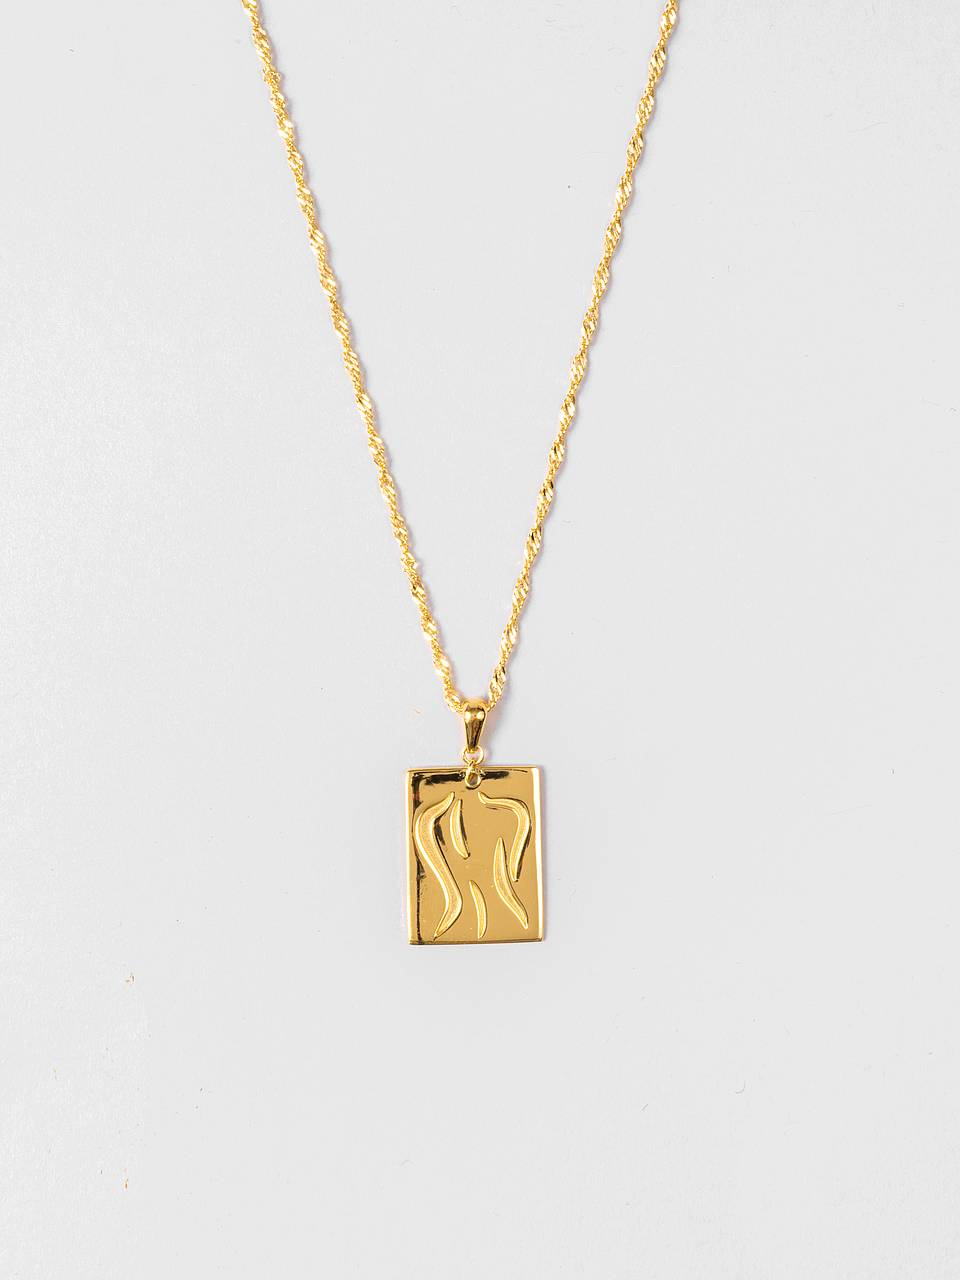 Humanity Necklace